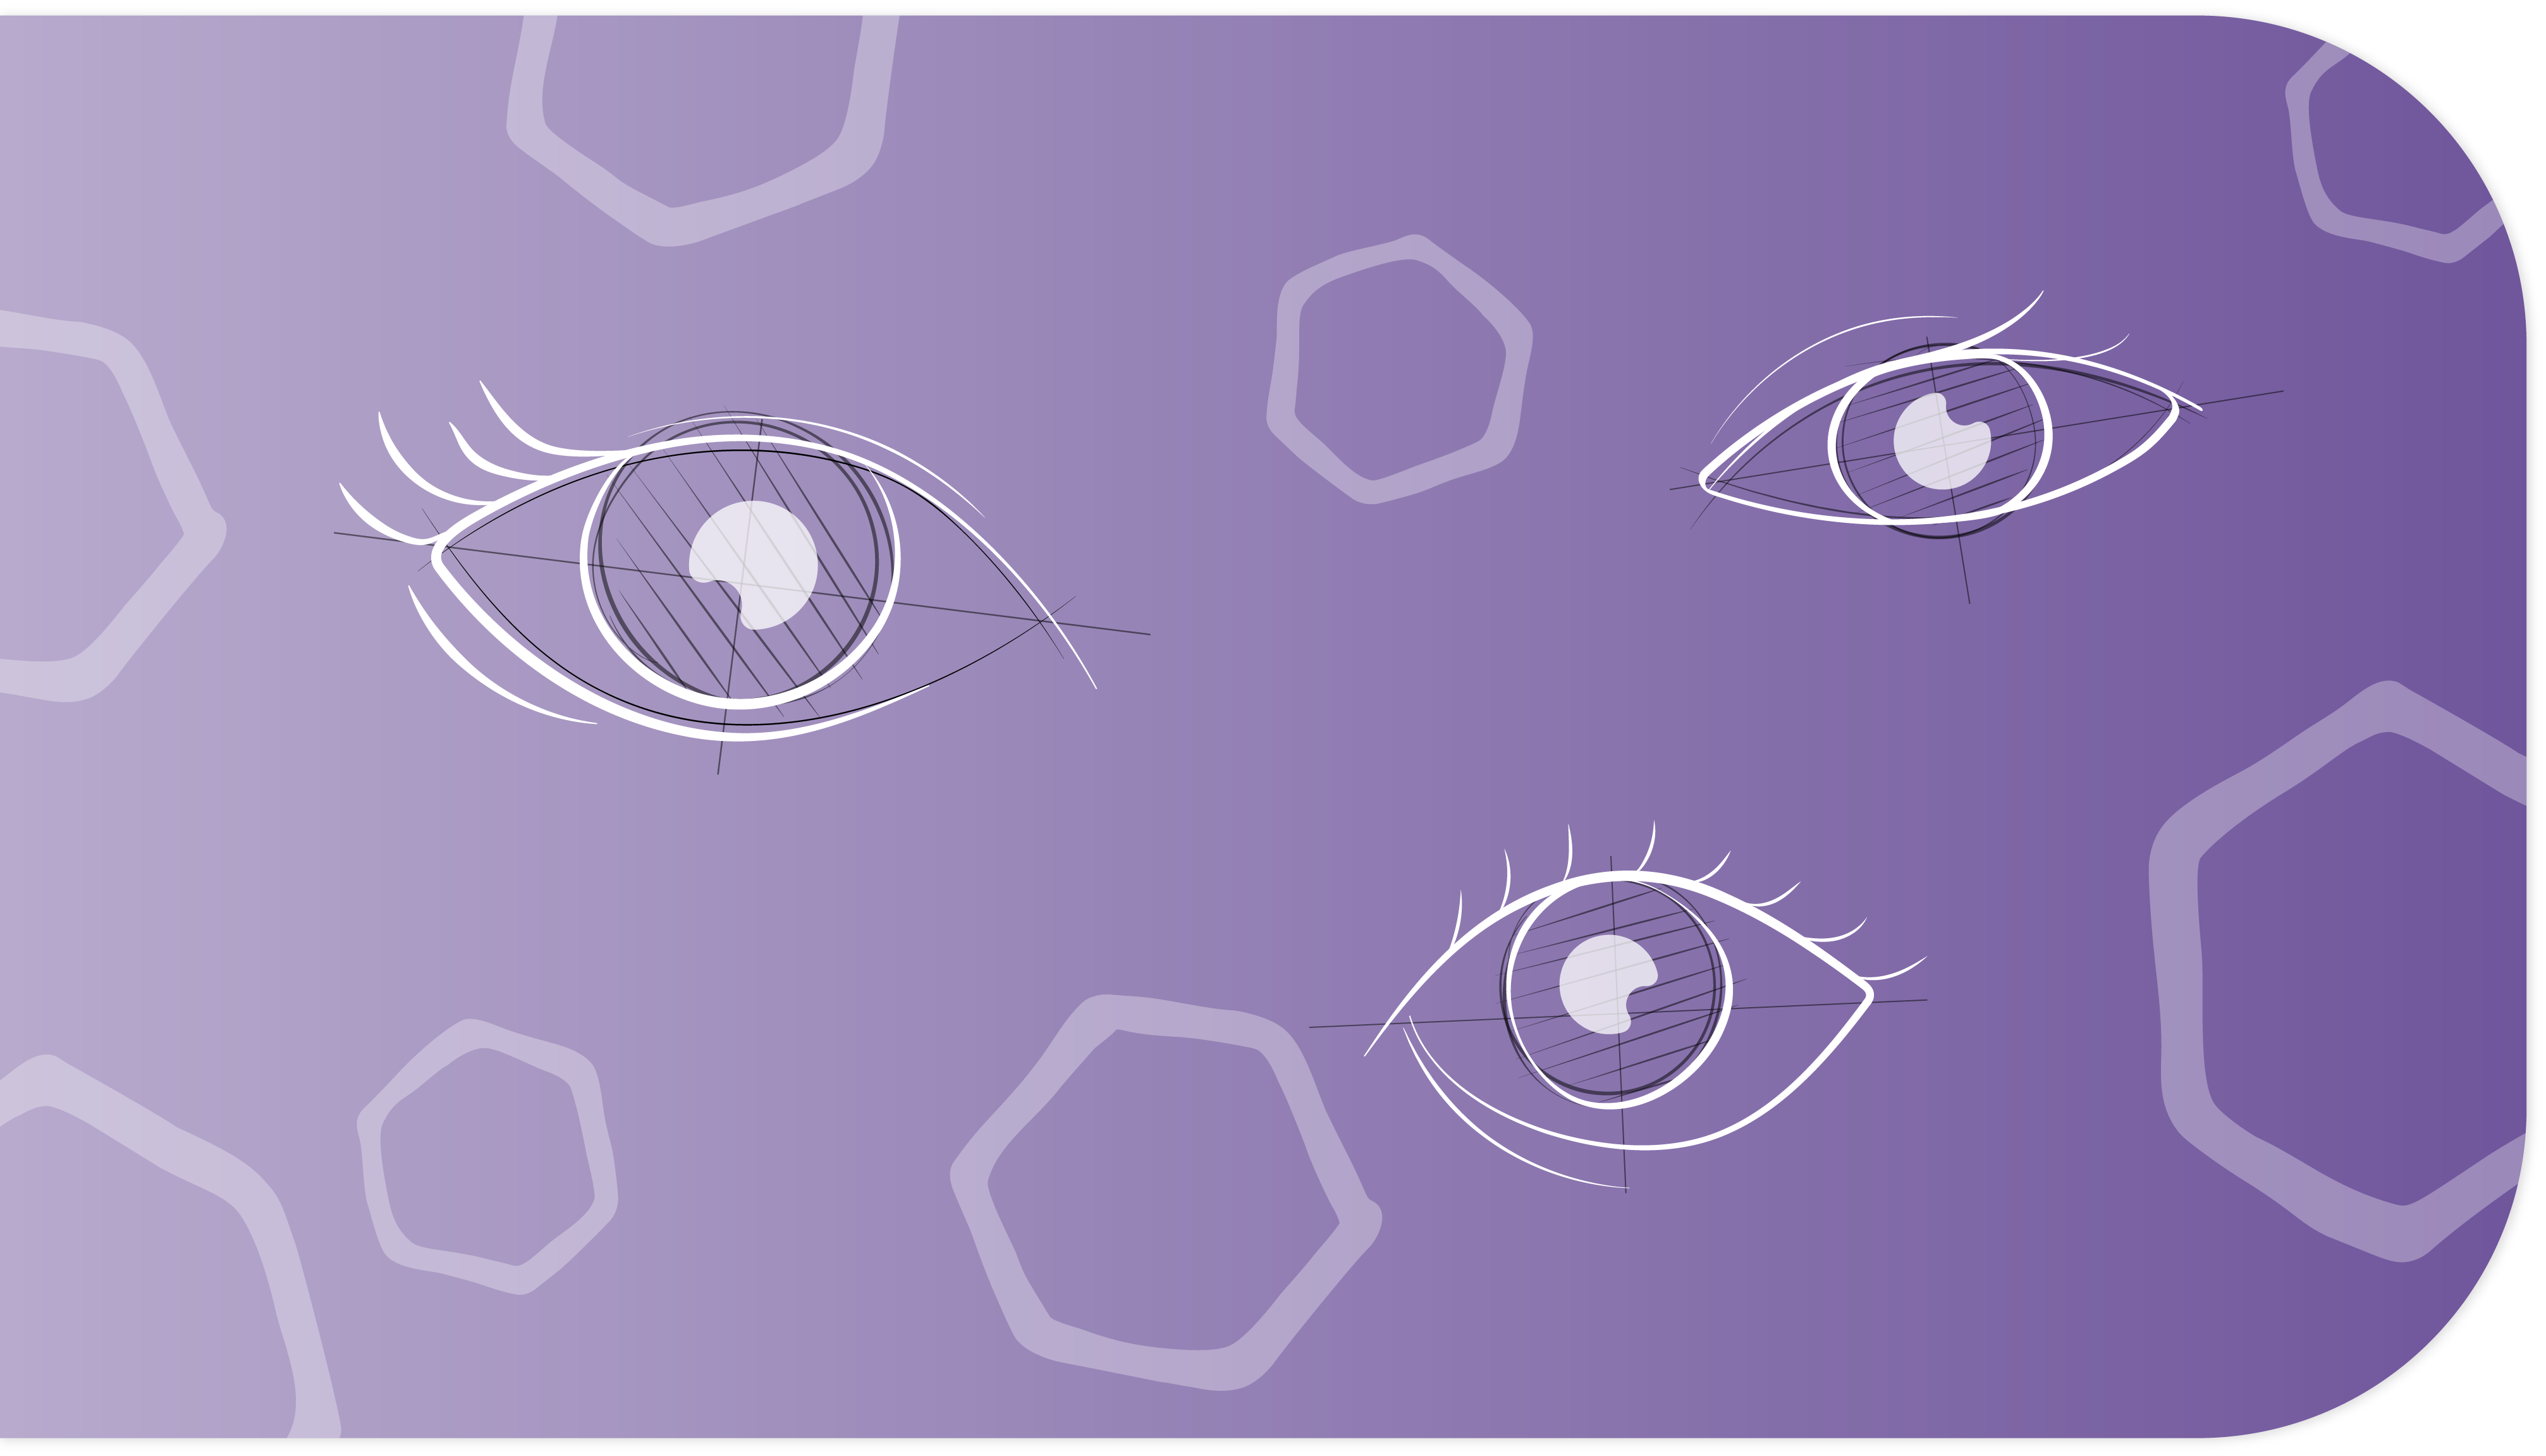 Chapter 2 banner indicating the start of a new chapter. Purple background with three eye icons.